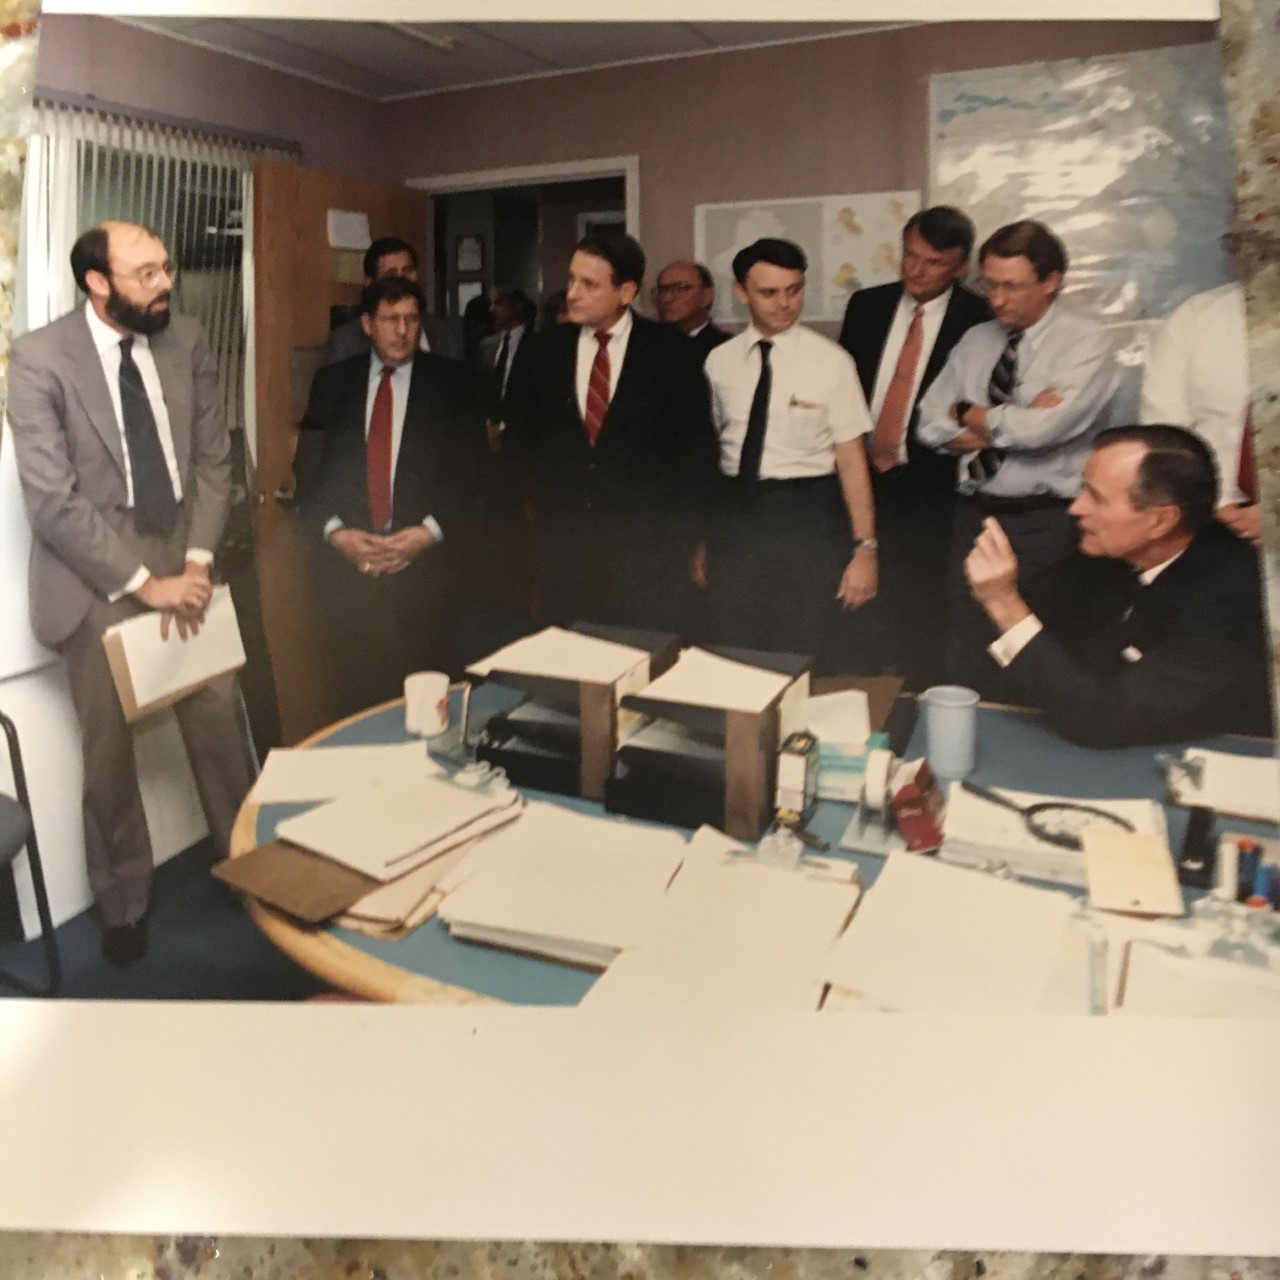 The author briefing President George H.W. Bush in August 1990 in the CIA’s Operations Center Source: Author’s personal collection.